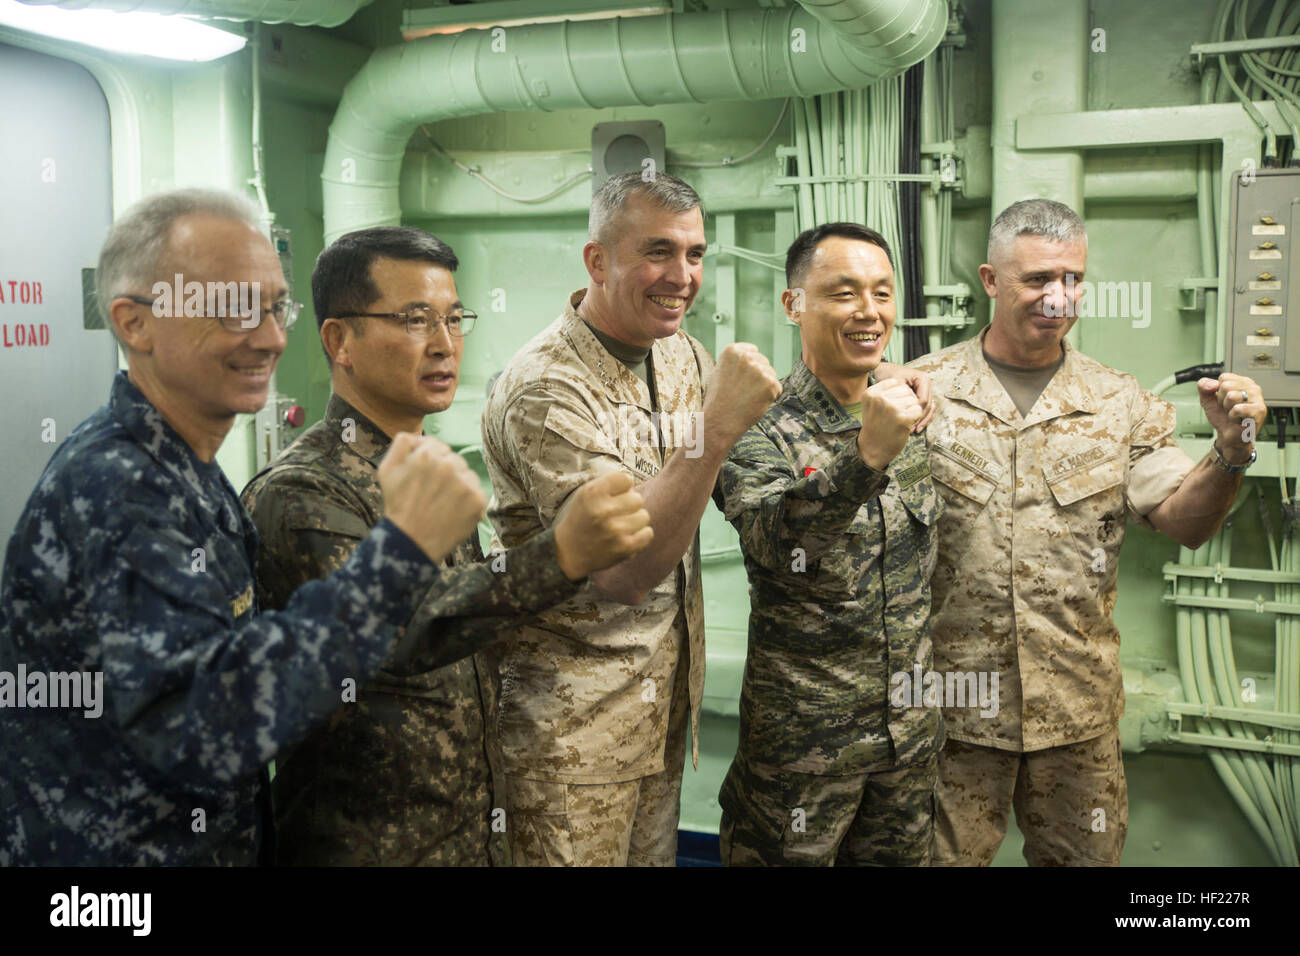 From left, U.S. Navy Rear Adm. Hugh Weatherald, Republic of Korea Navy Rear Adm. Swo Chun Jung, U.S. Marine Lt. Gen. John Wissler, ROK Marine Brig. Gen. Cho Kang Rae and U.S. Marine Brig. Gen. Paul Kennedy pose for a group photo March 31 after a press conference with civilian media to discuss Ssang Yong 2014 on the USS Bonhomme Richard off the coast of Republic of Korea. Ssang Yong, which means 'twin dragons,' representing the U.S. and ROK forces, is intended to strengthen ROK-U.S. combat readiness and combined interoperability and advance the ROK Marine Corps Marine Task Force and command and Stock Photo